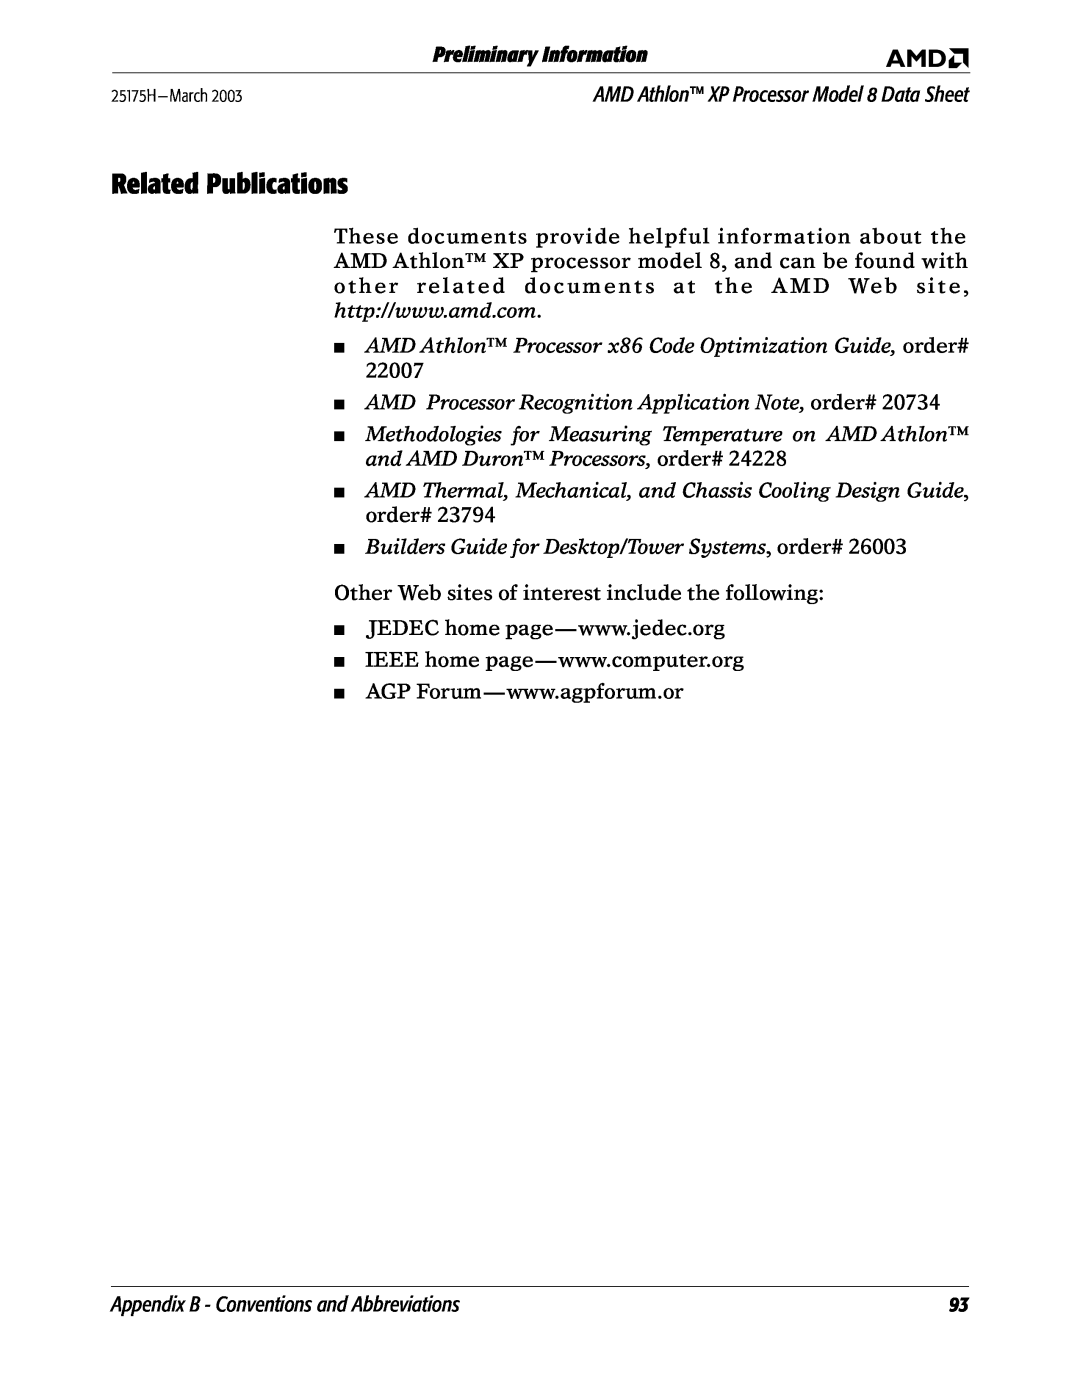 AMD manual Related Publications, AMD Athlon Processor x86 Code Optimization Guide, order#, Preliminary Information 